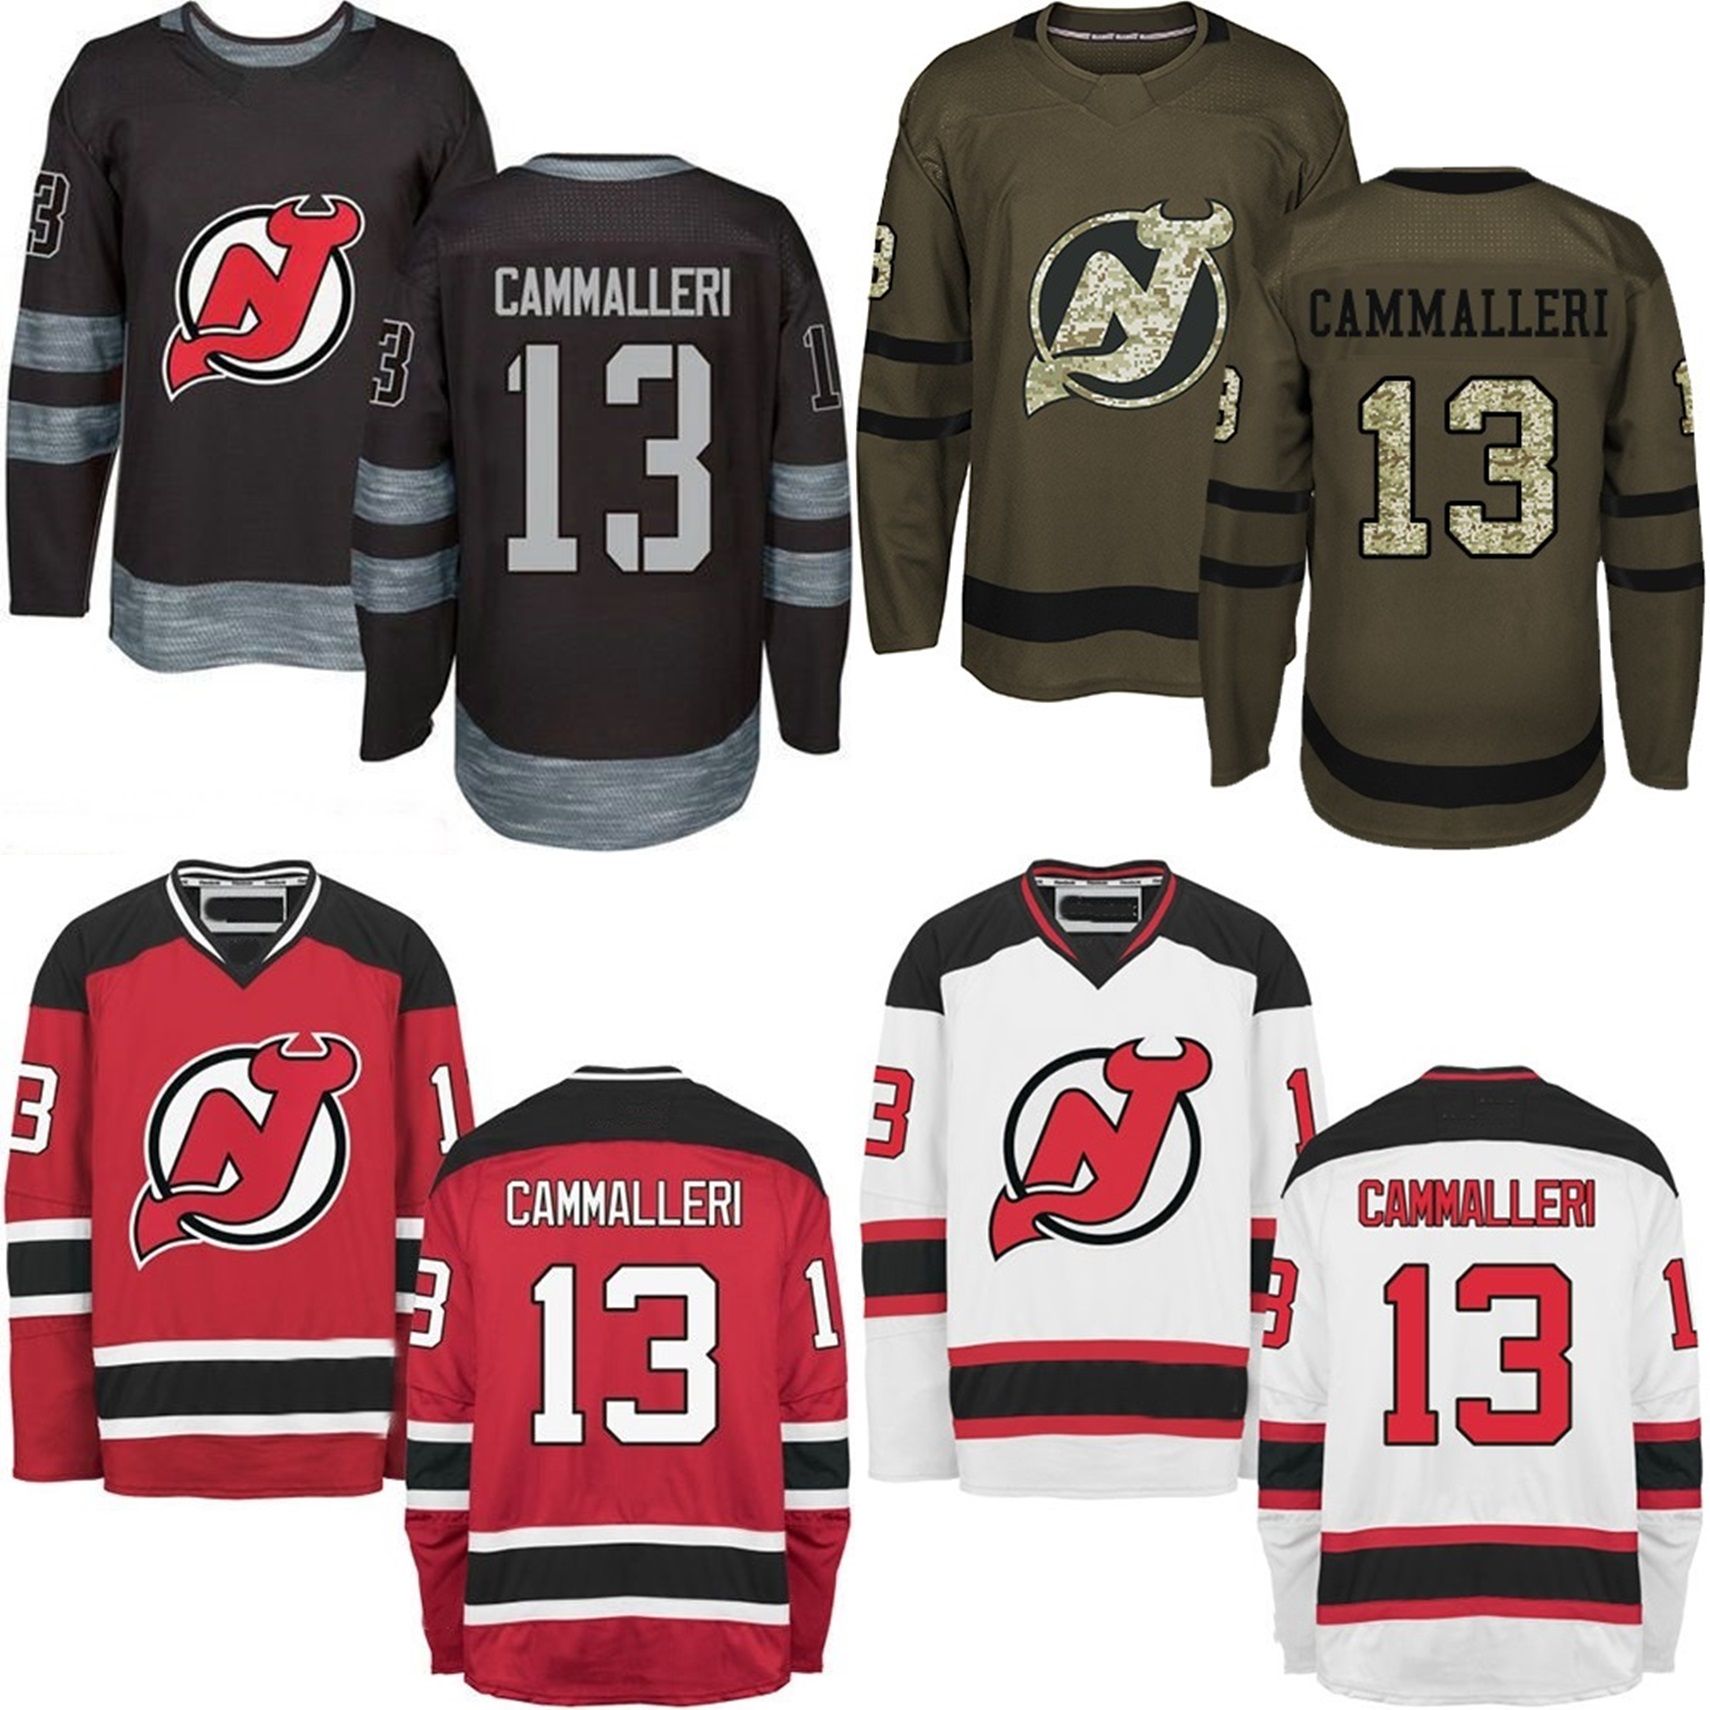 mike cammalleri jersey number